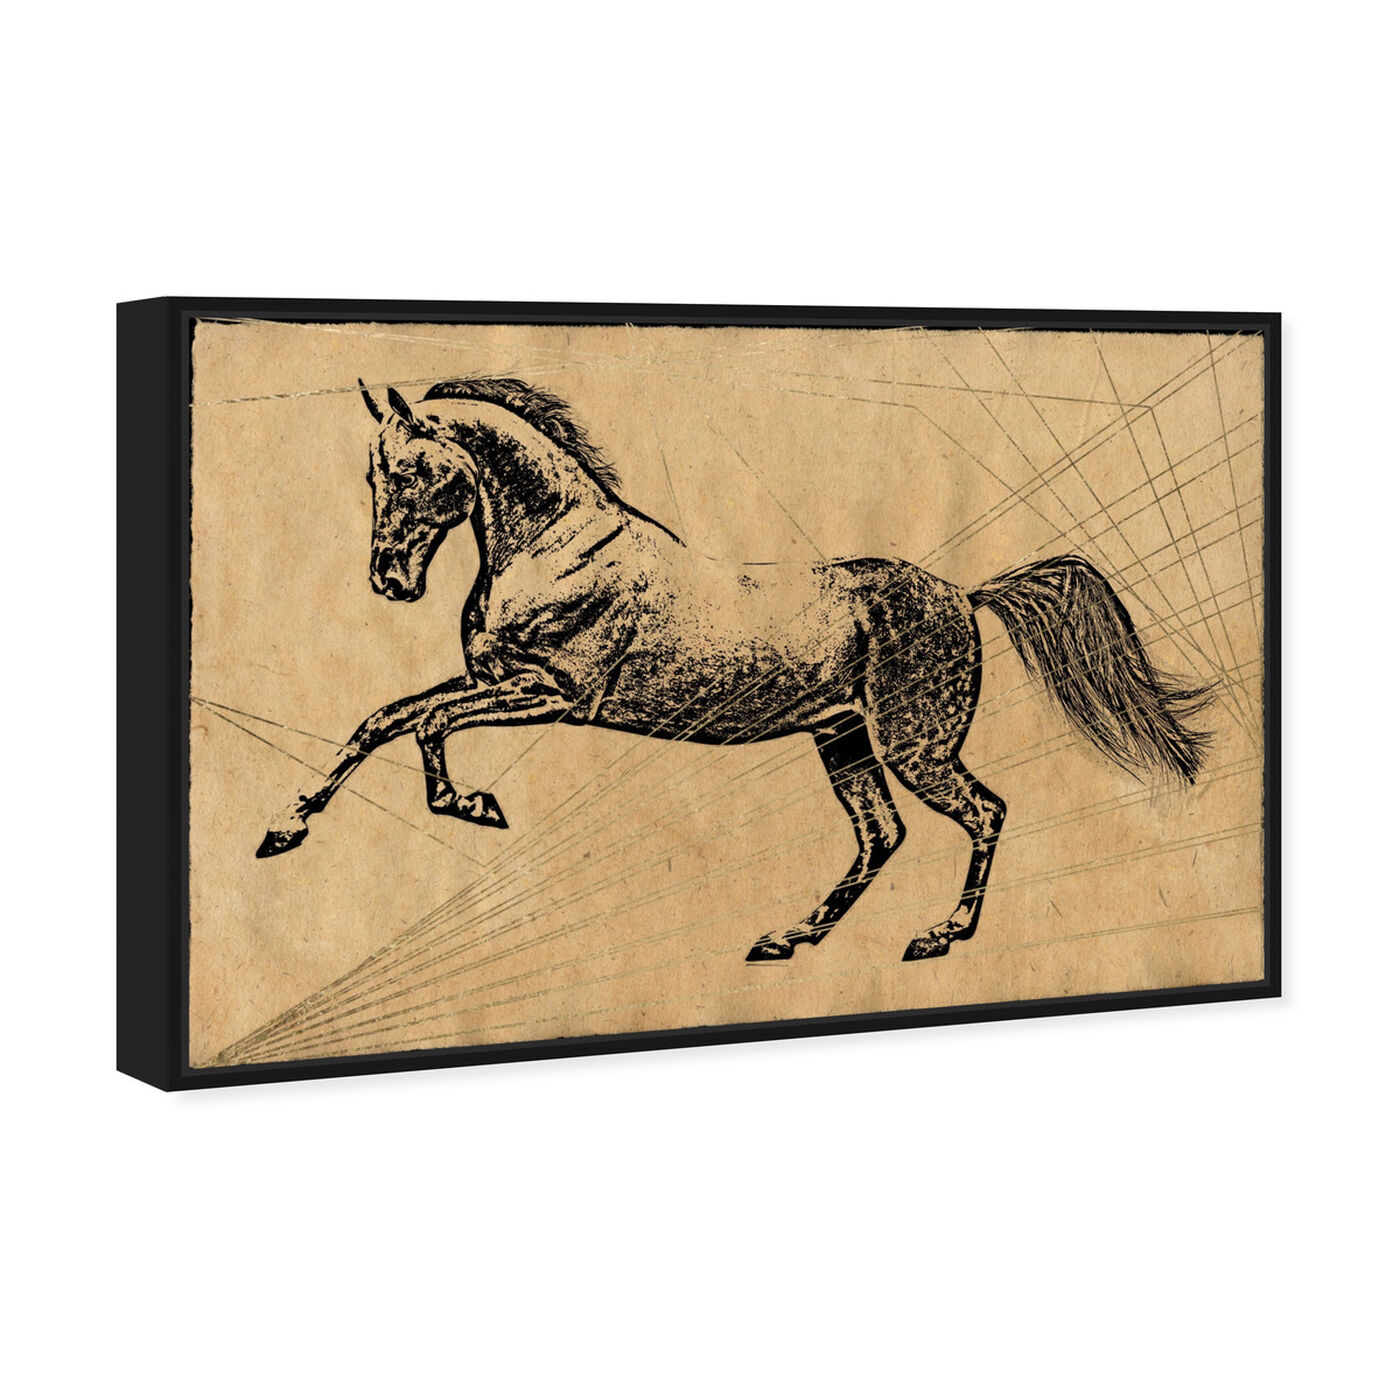 Angled view of Horse Print featuring animals and farm animals art.